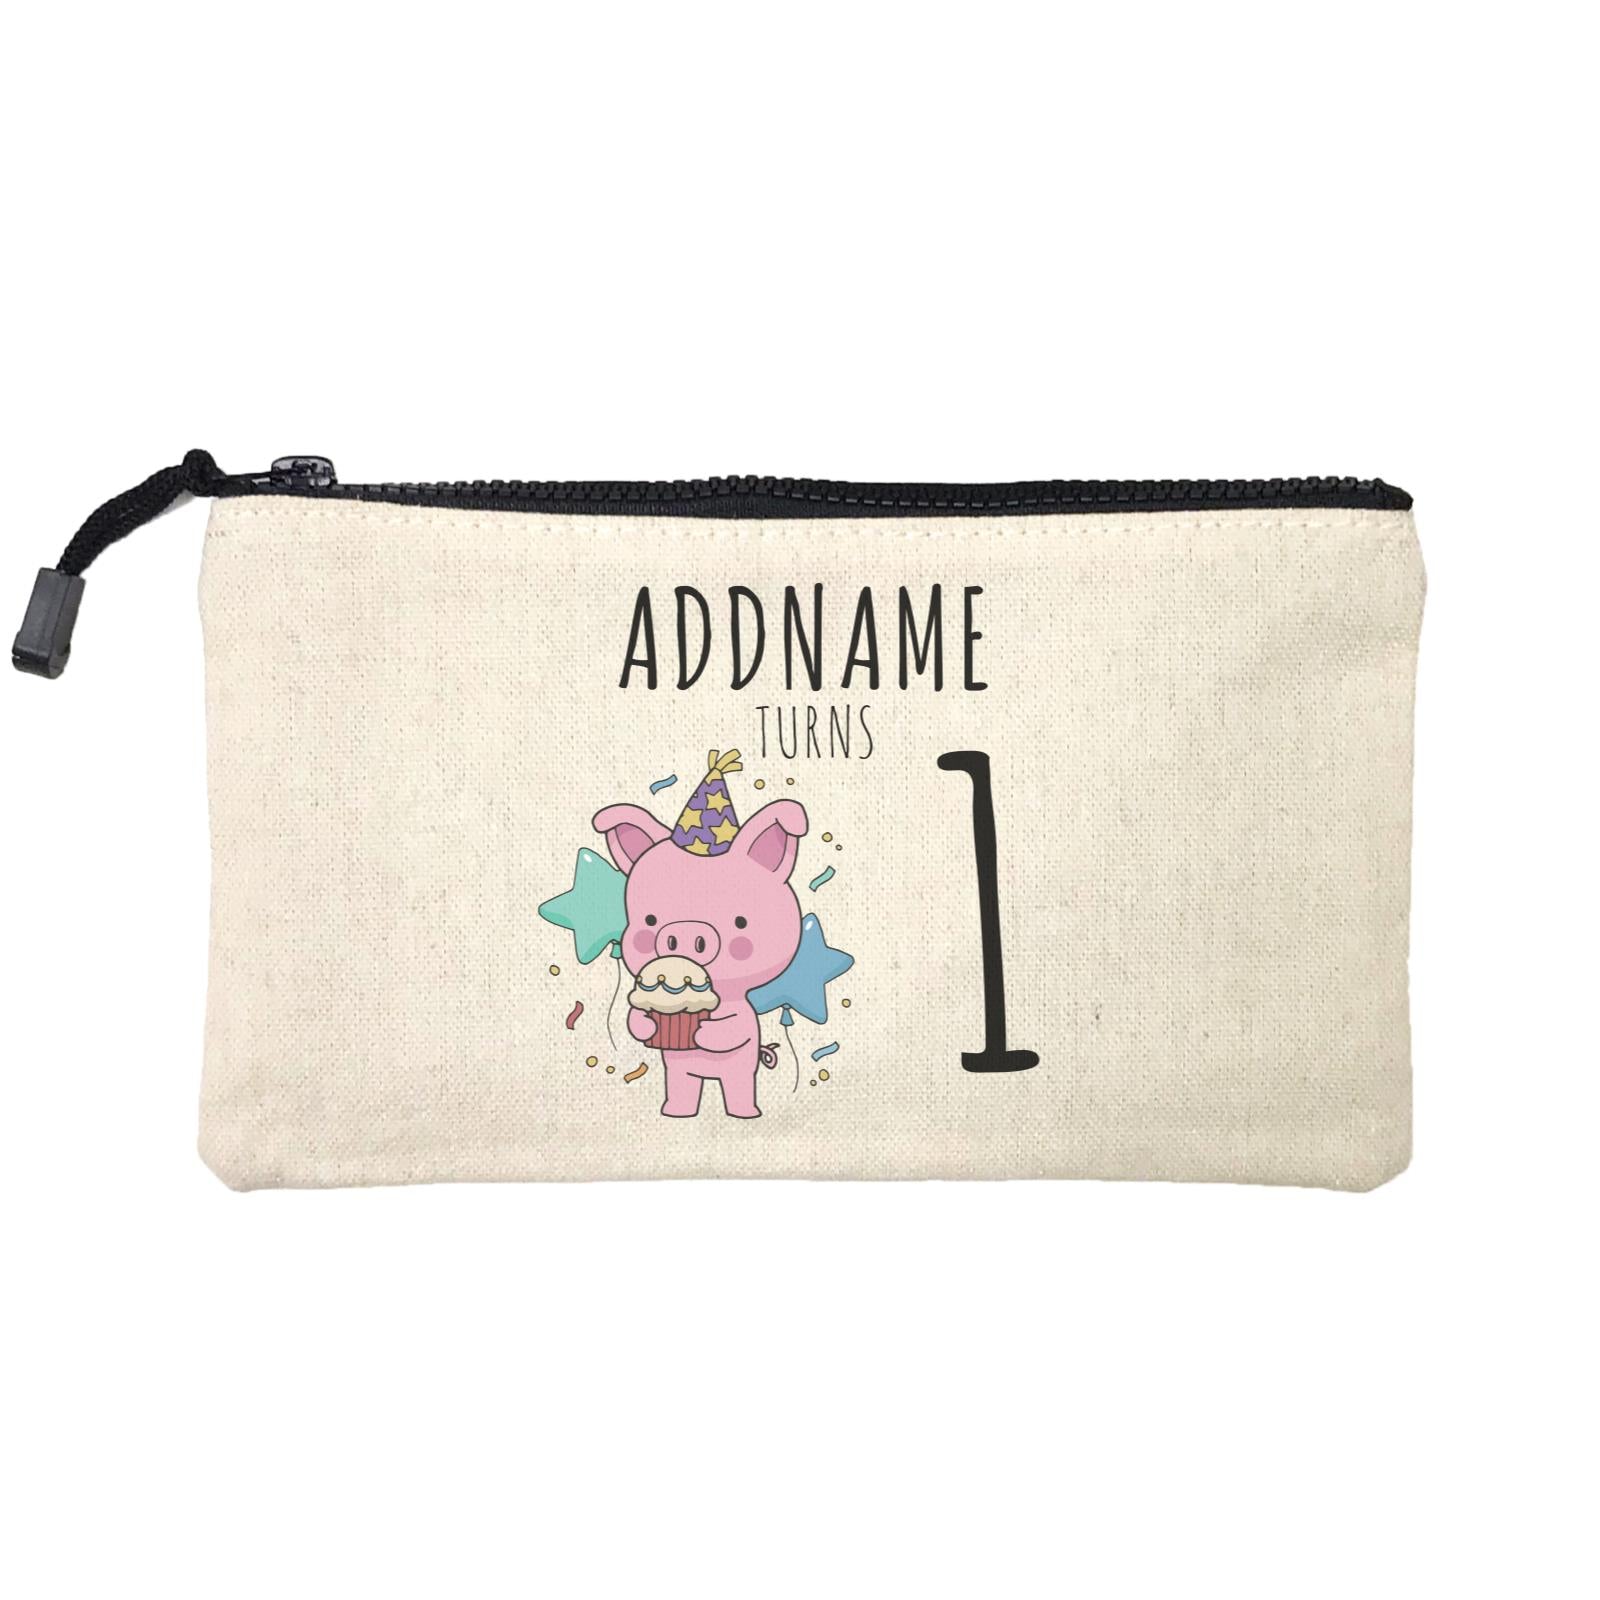 Birthday Sketch Animals Pig with Party Hat Eating Cupcake Addname Turns 1 Mini Accessories Stationery Pouch